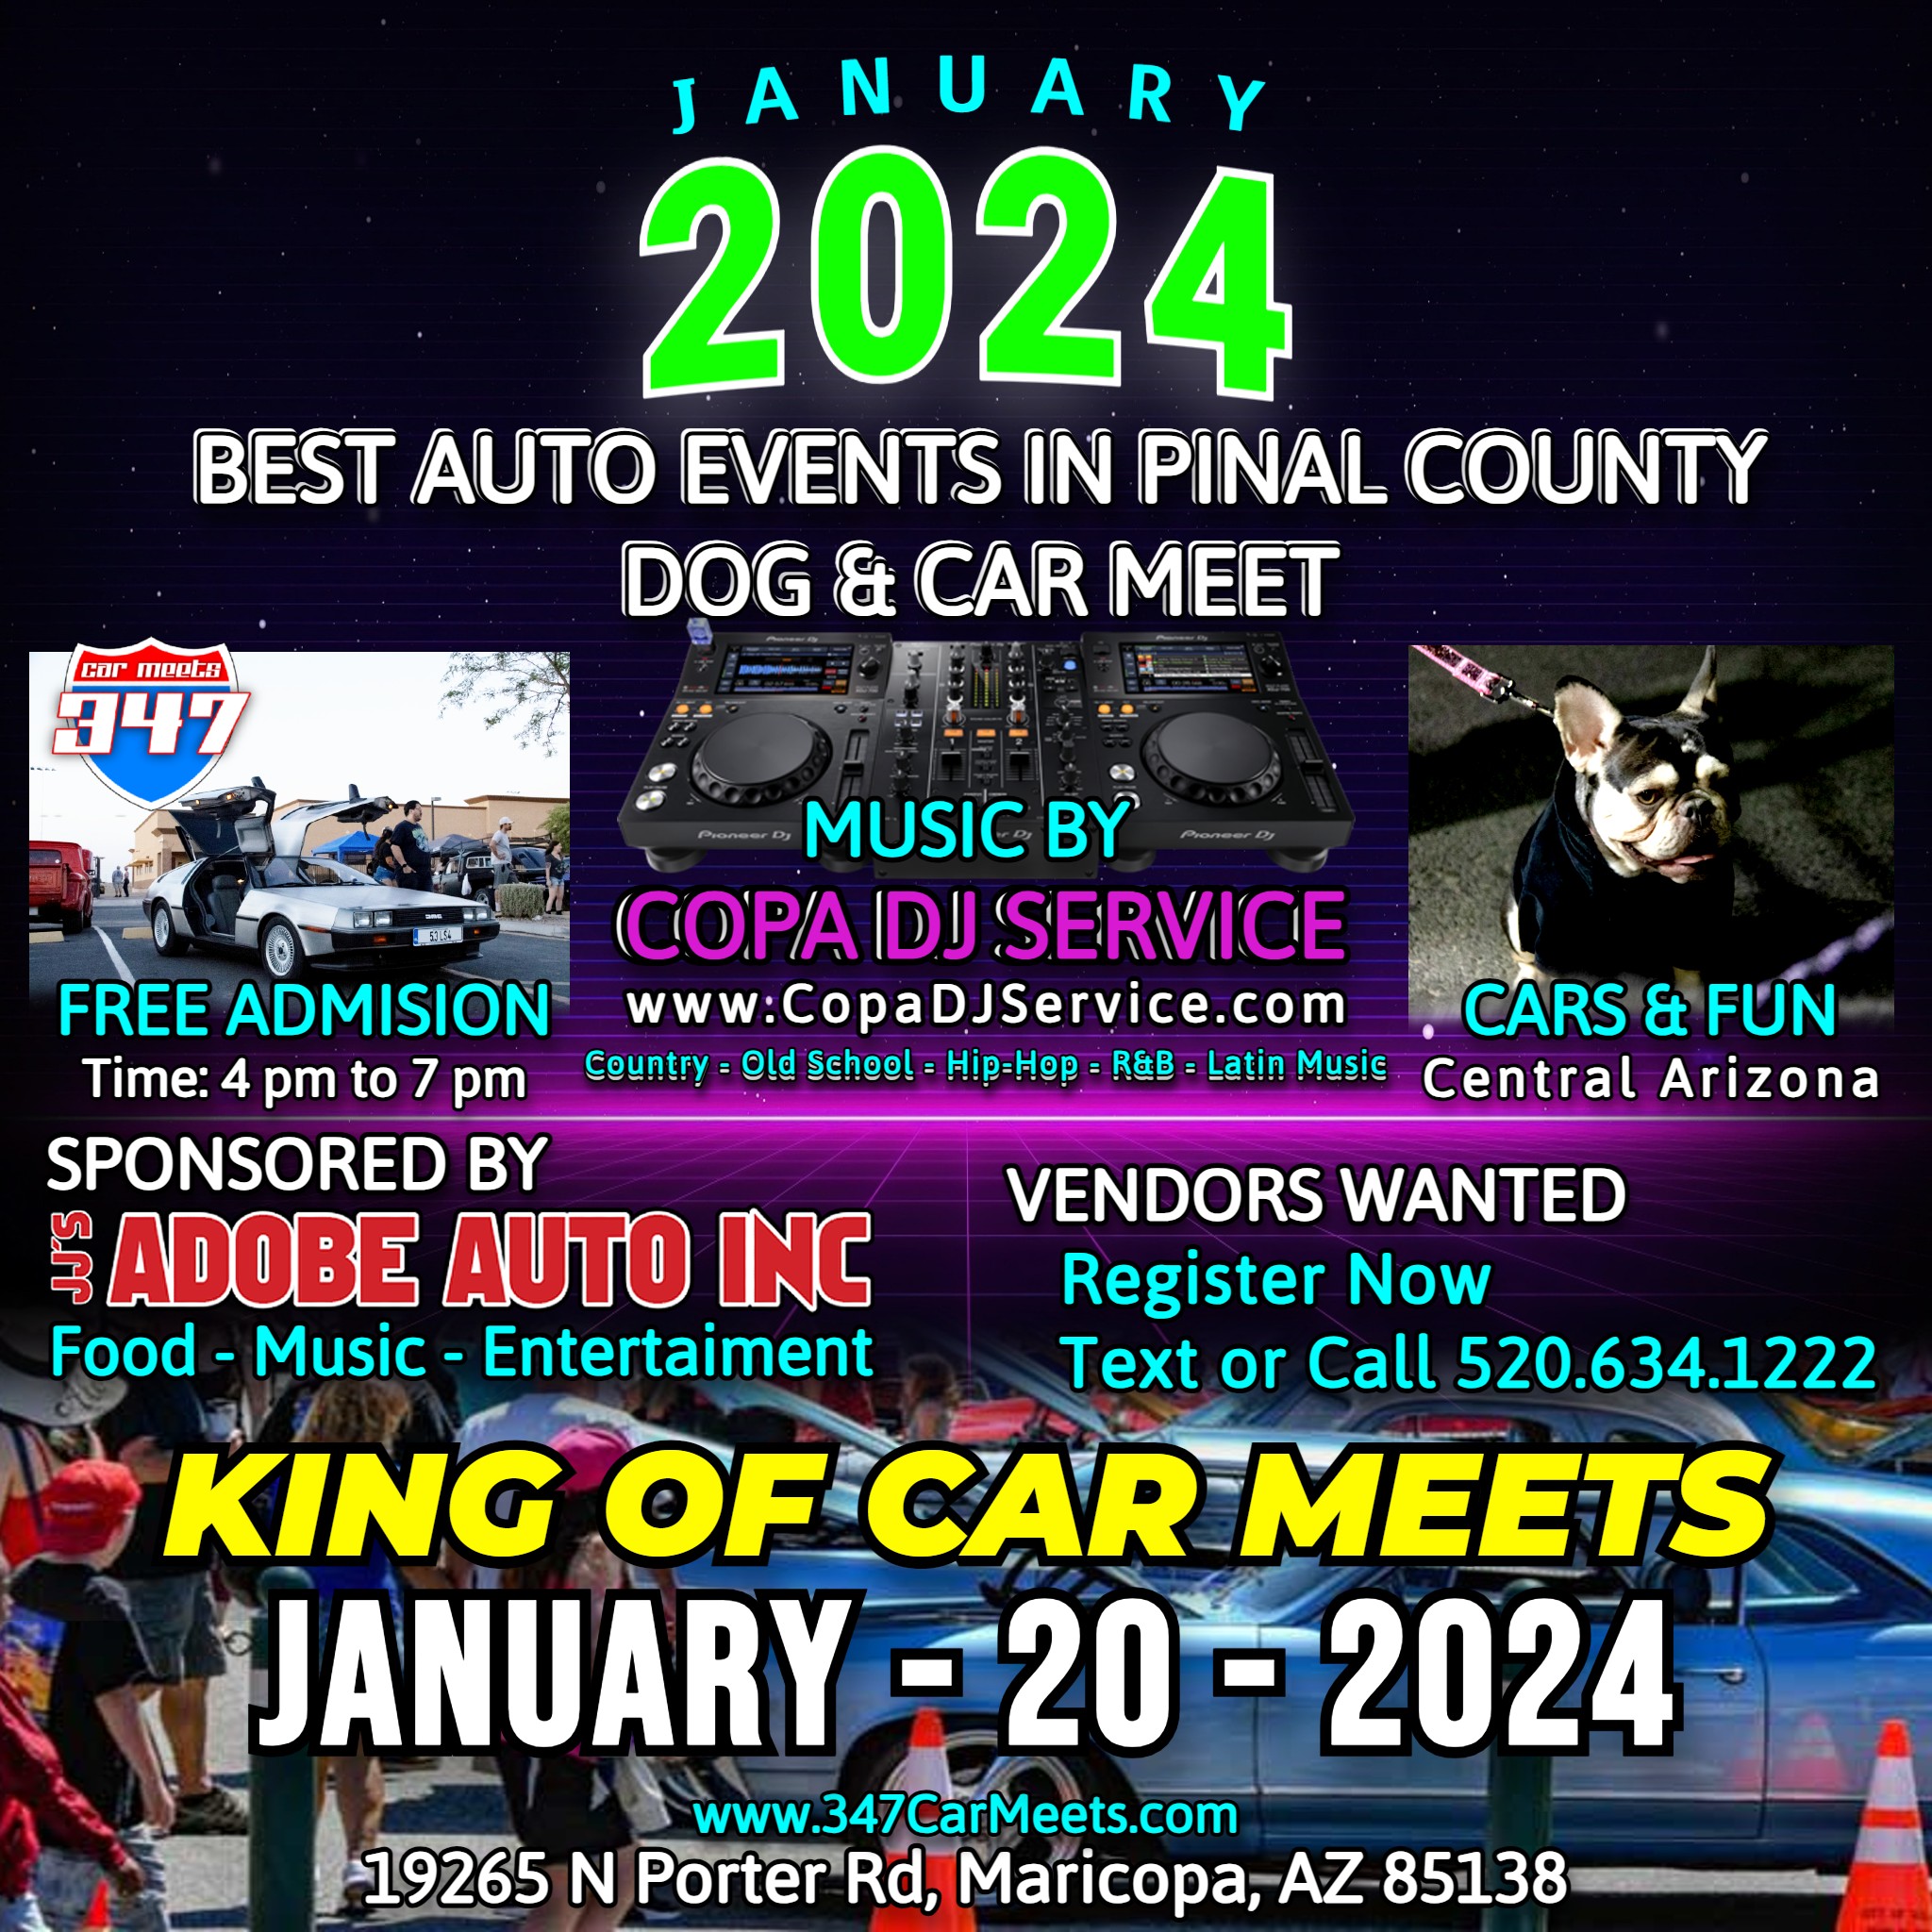 king of car meets event image